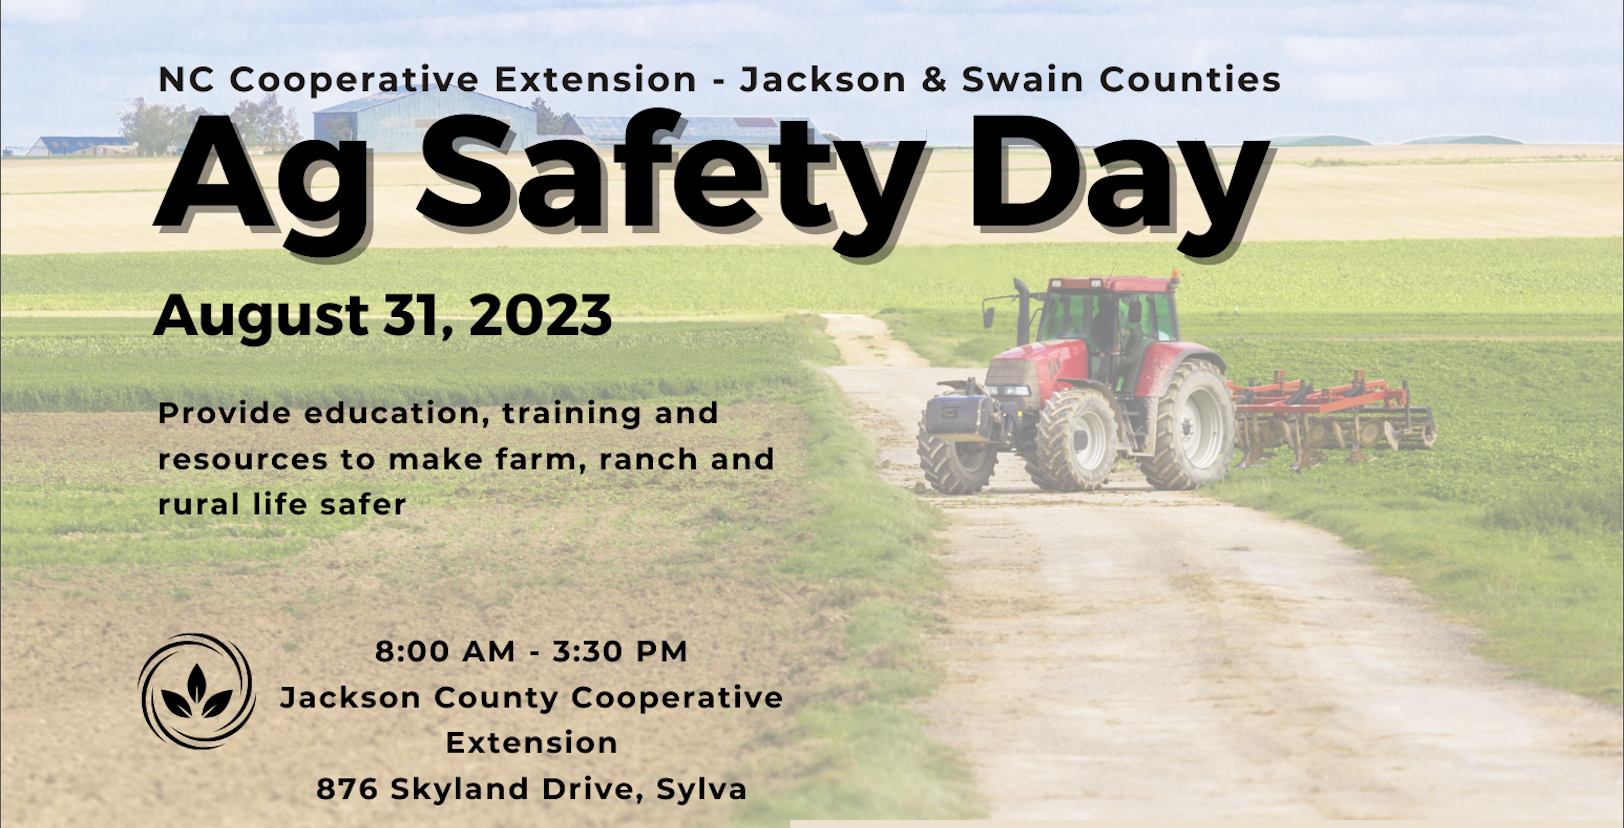 Ag Safety Day August 31, 2023 Provide education, training and resources to make farm, ranch and rural life safer